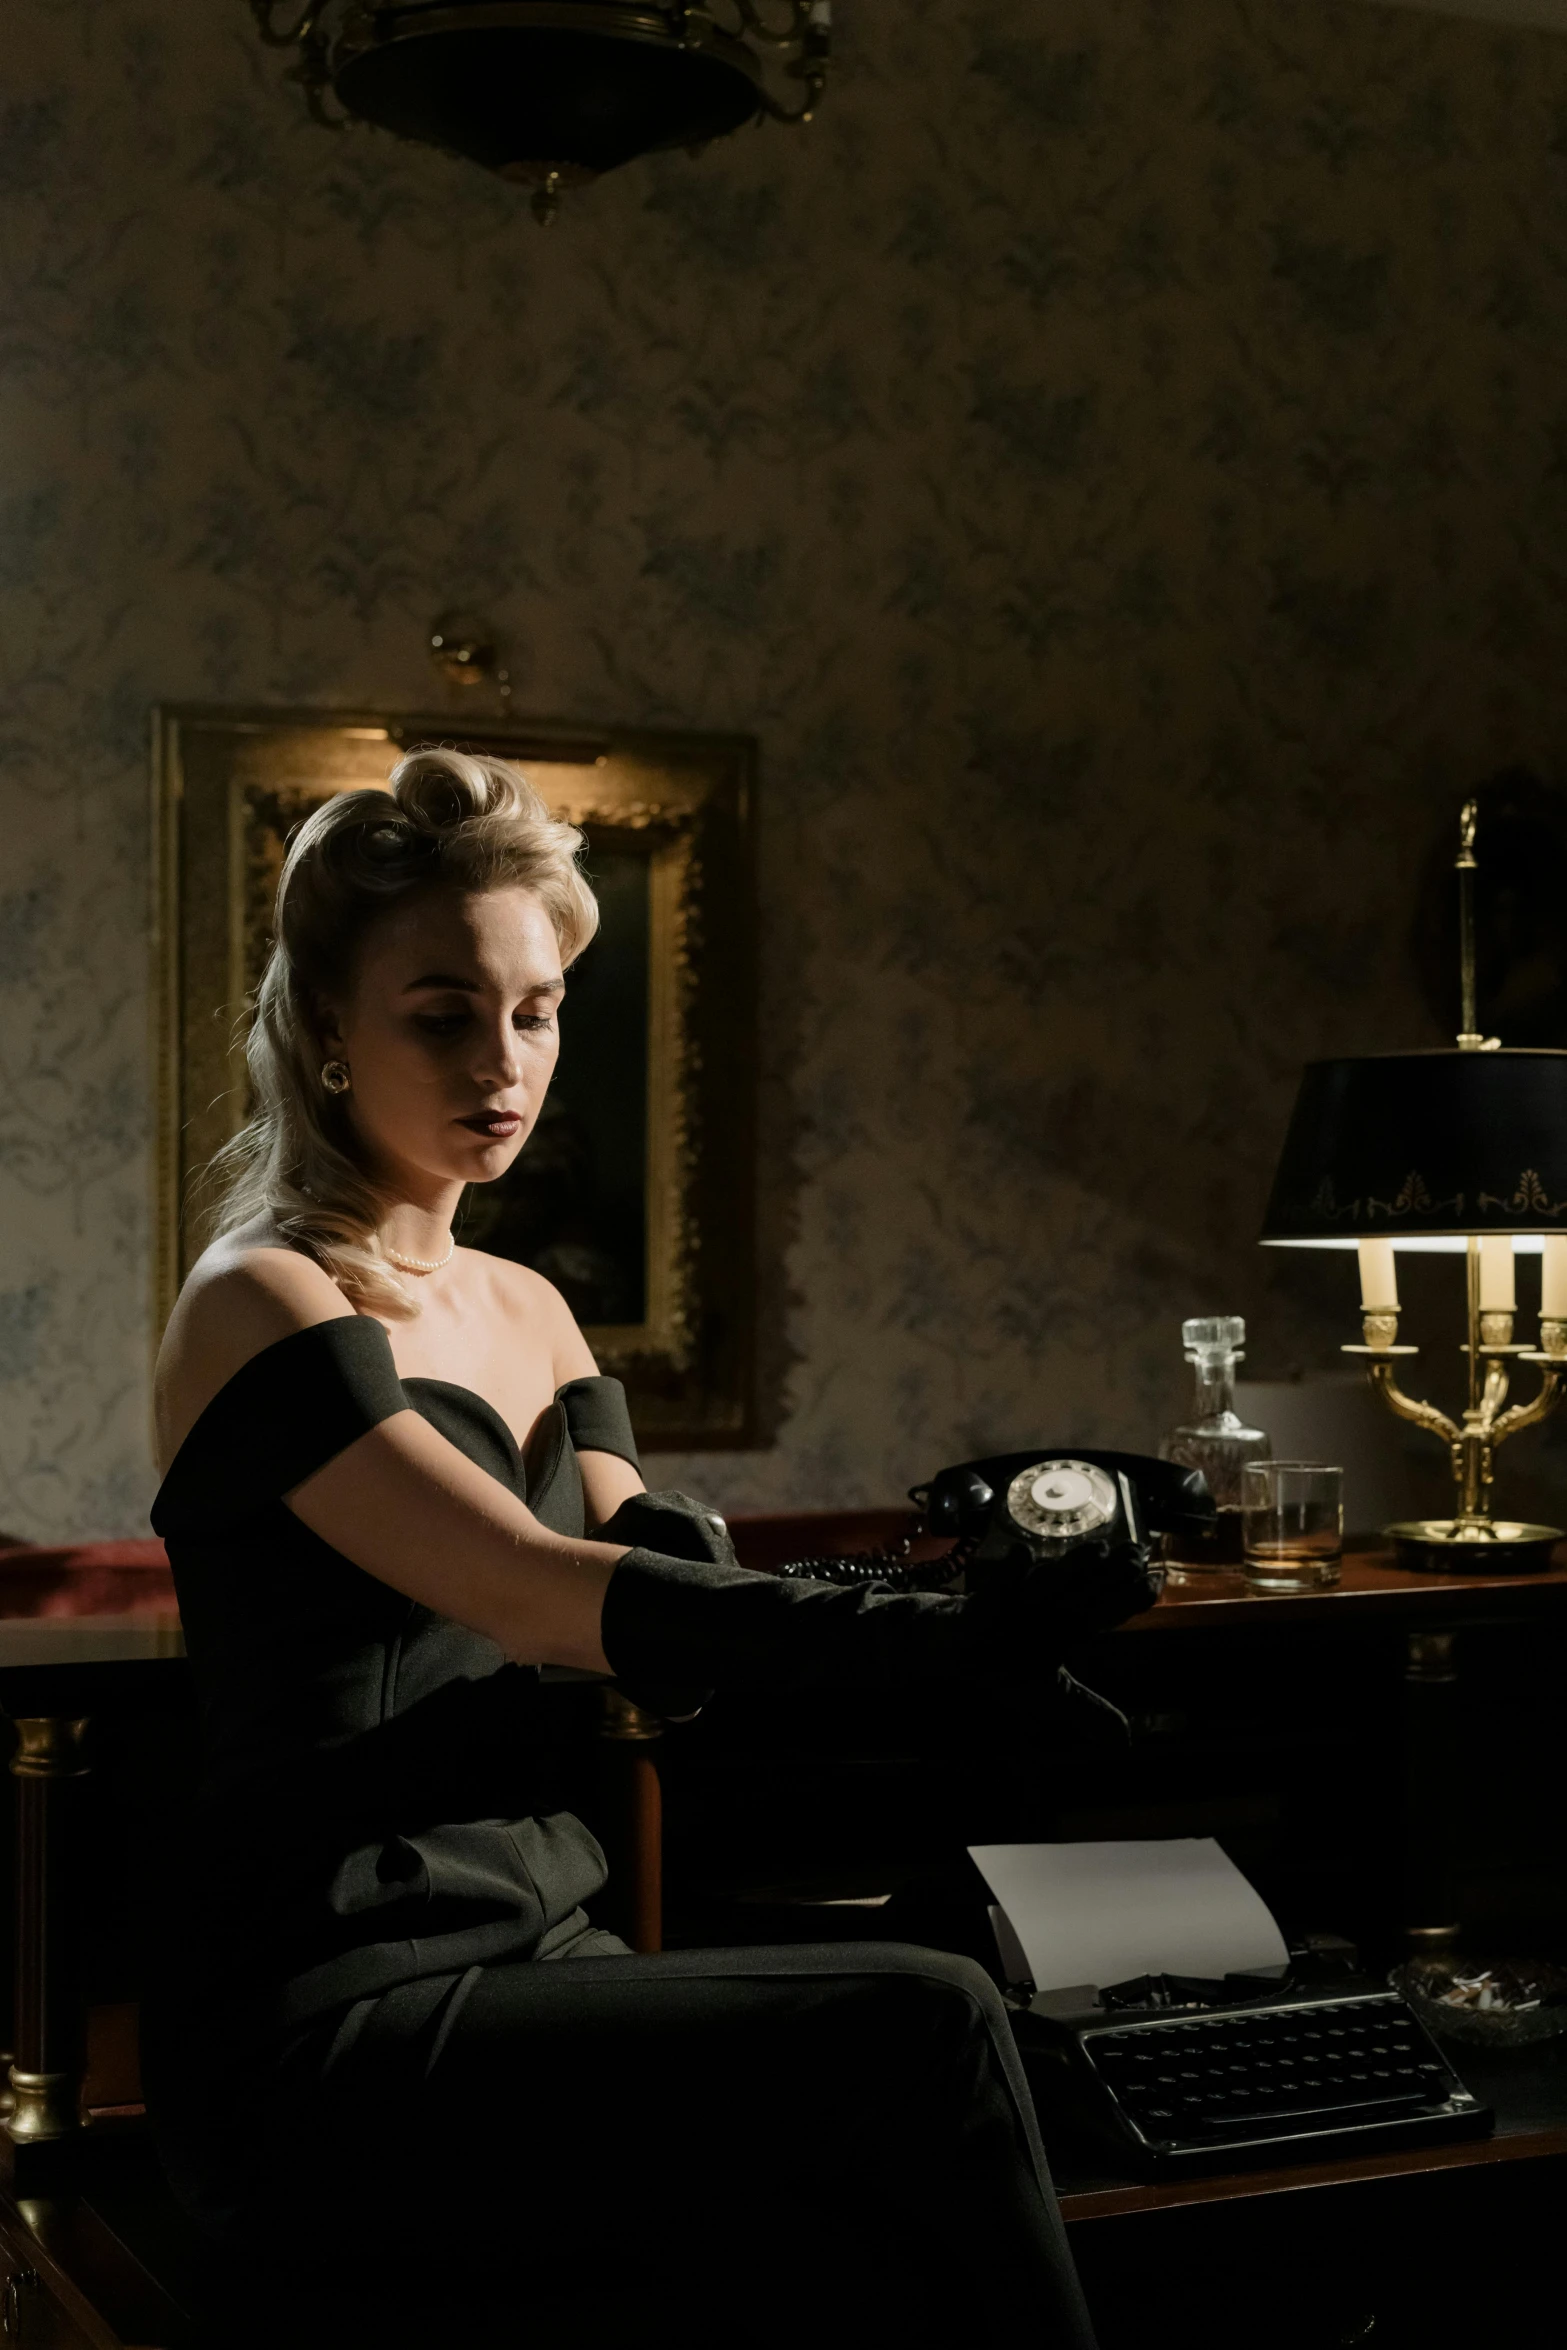 a woman sitting at a desk with a typewriter, a portrait, inspired by Albert Edelfelt, margot robbie as catwoman, [ theatrical ], slide show, elegant atmosphere